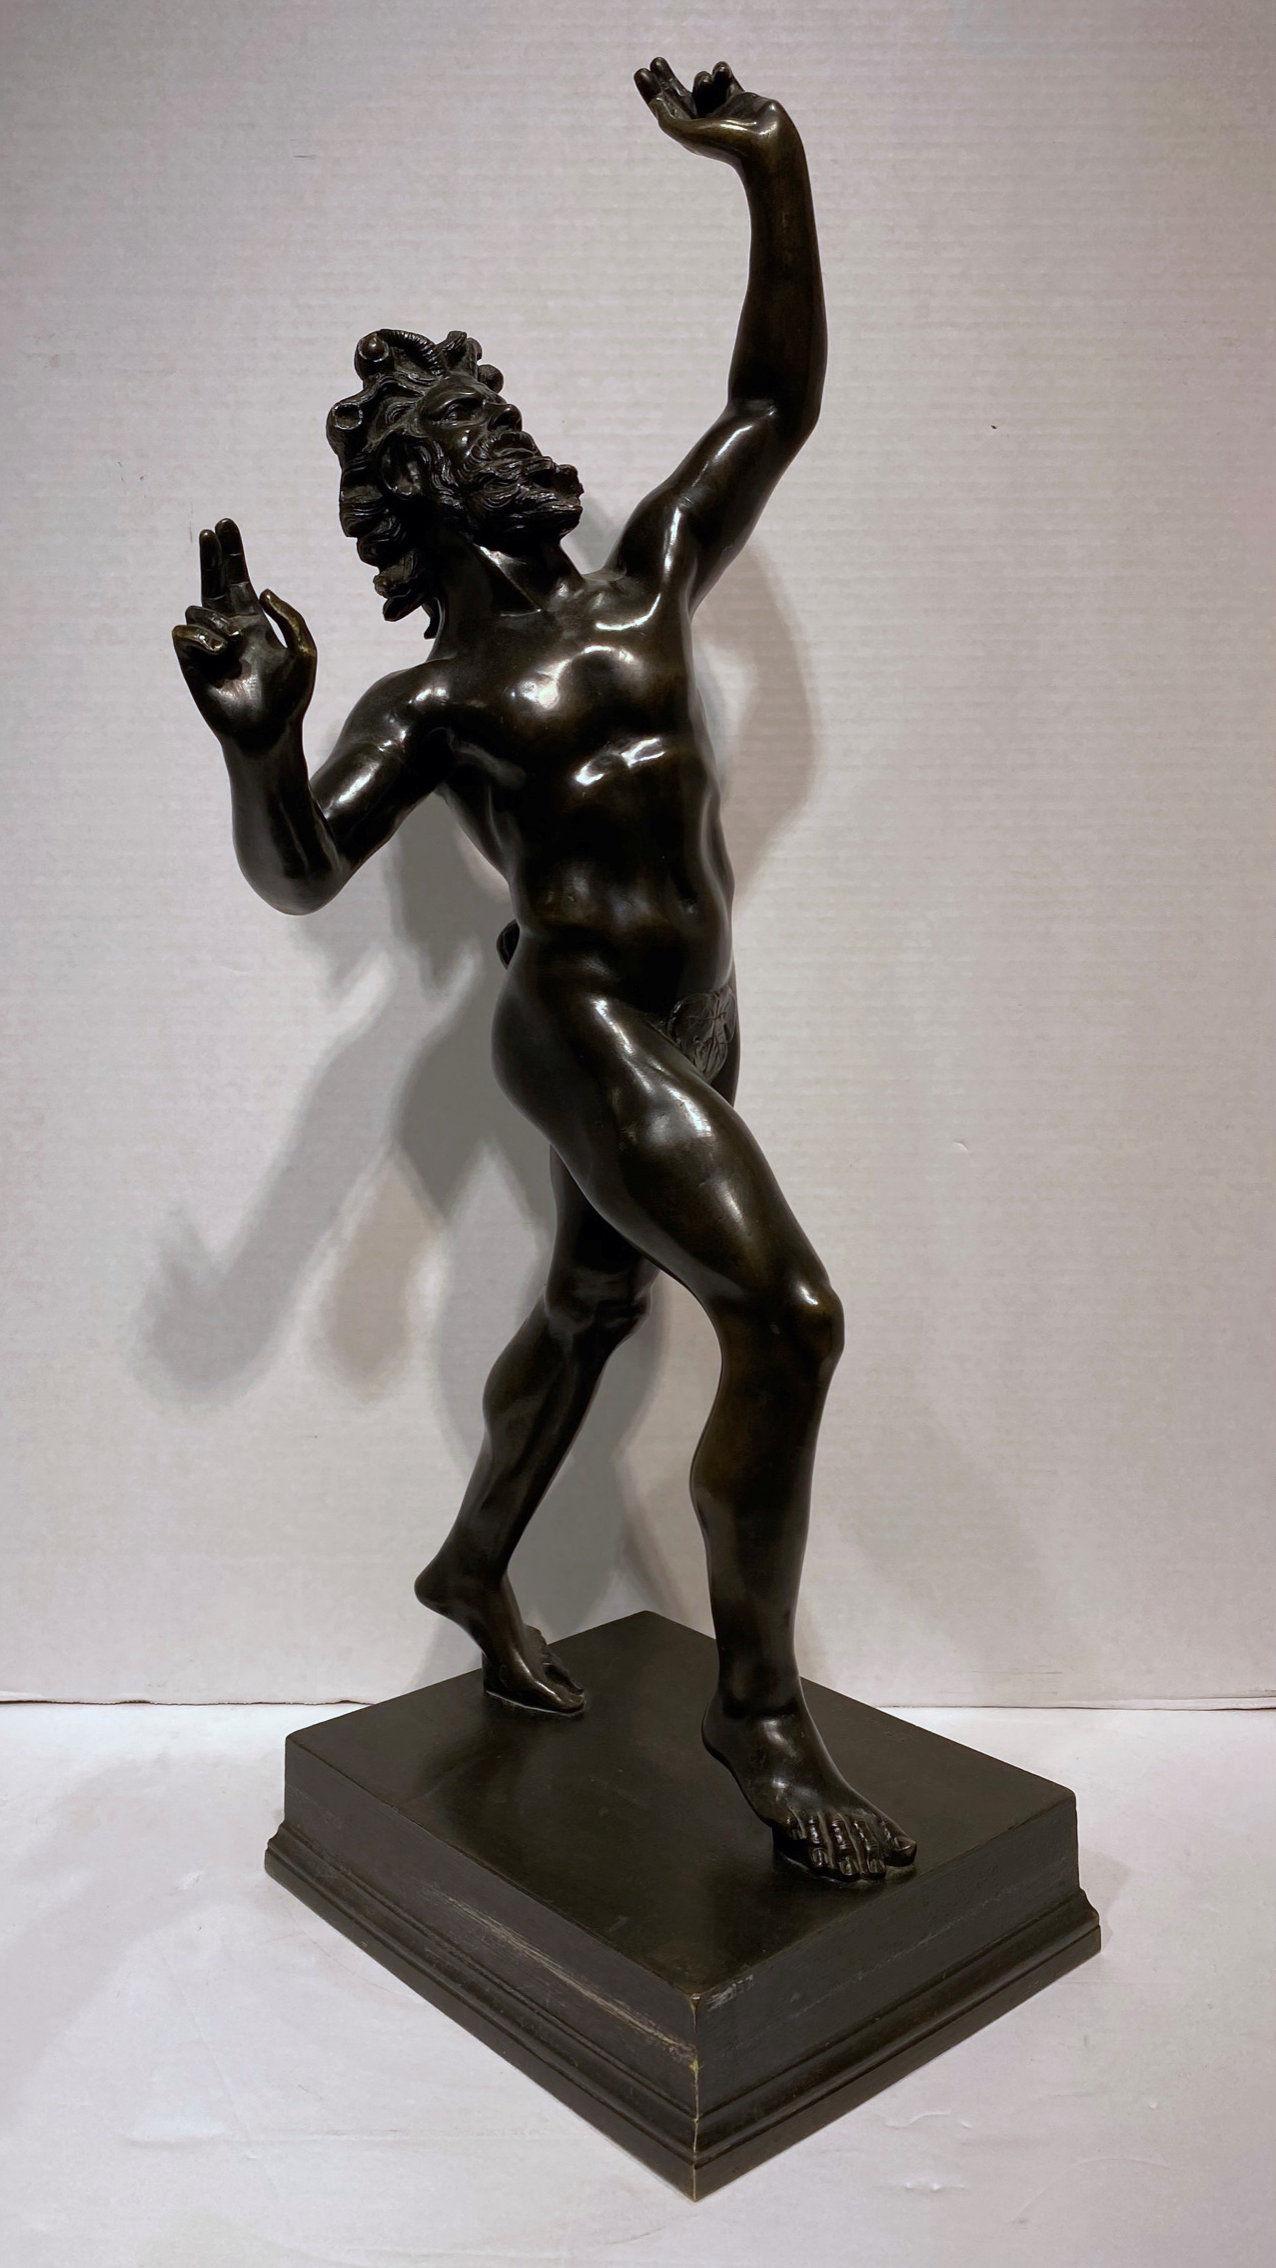 Italian Faun Bronze Sculpture after the Ancient from Pompeii